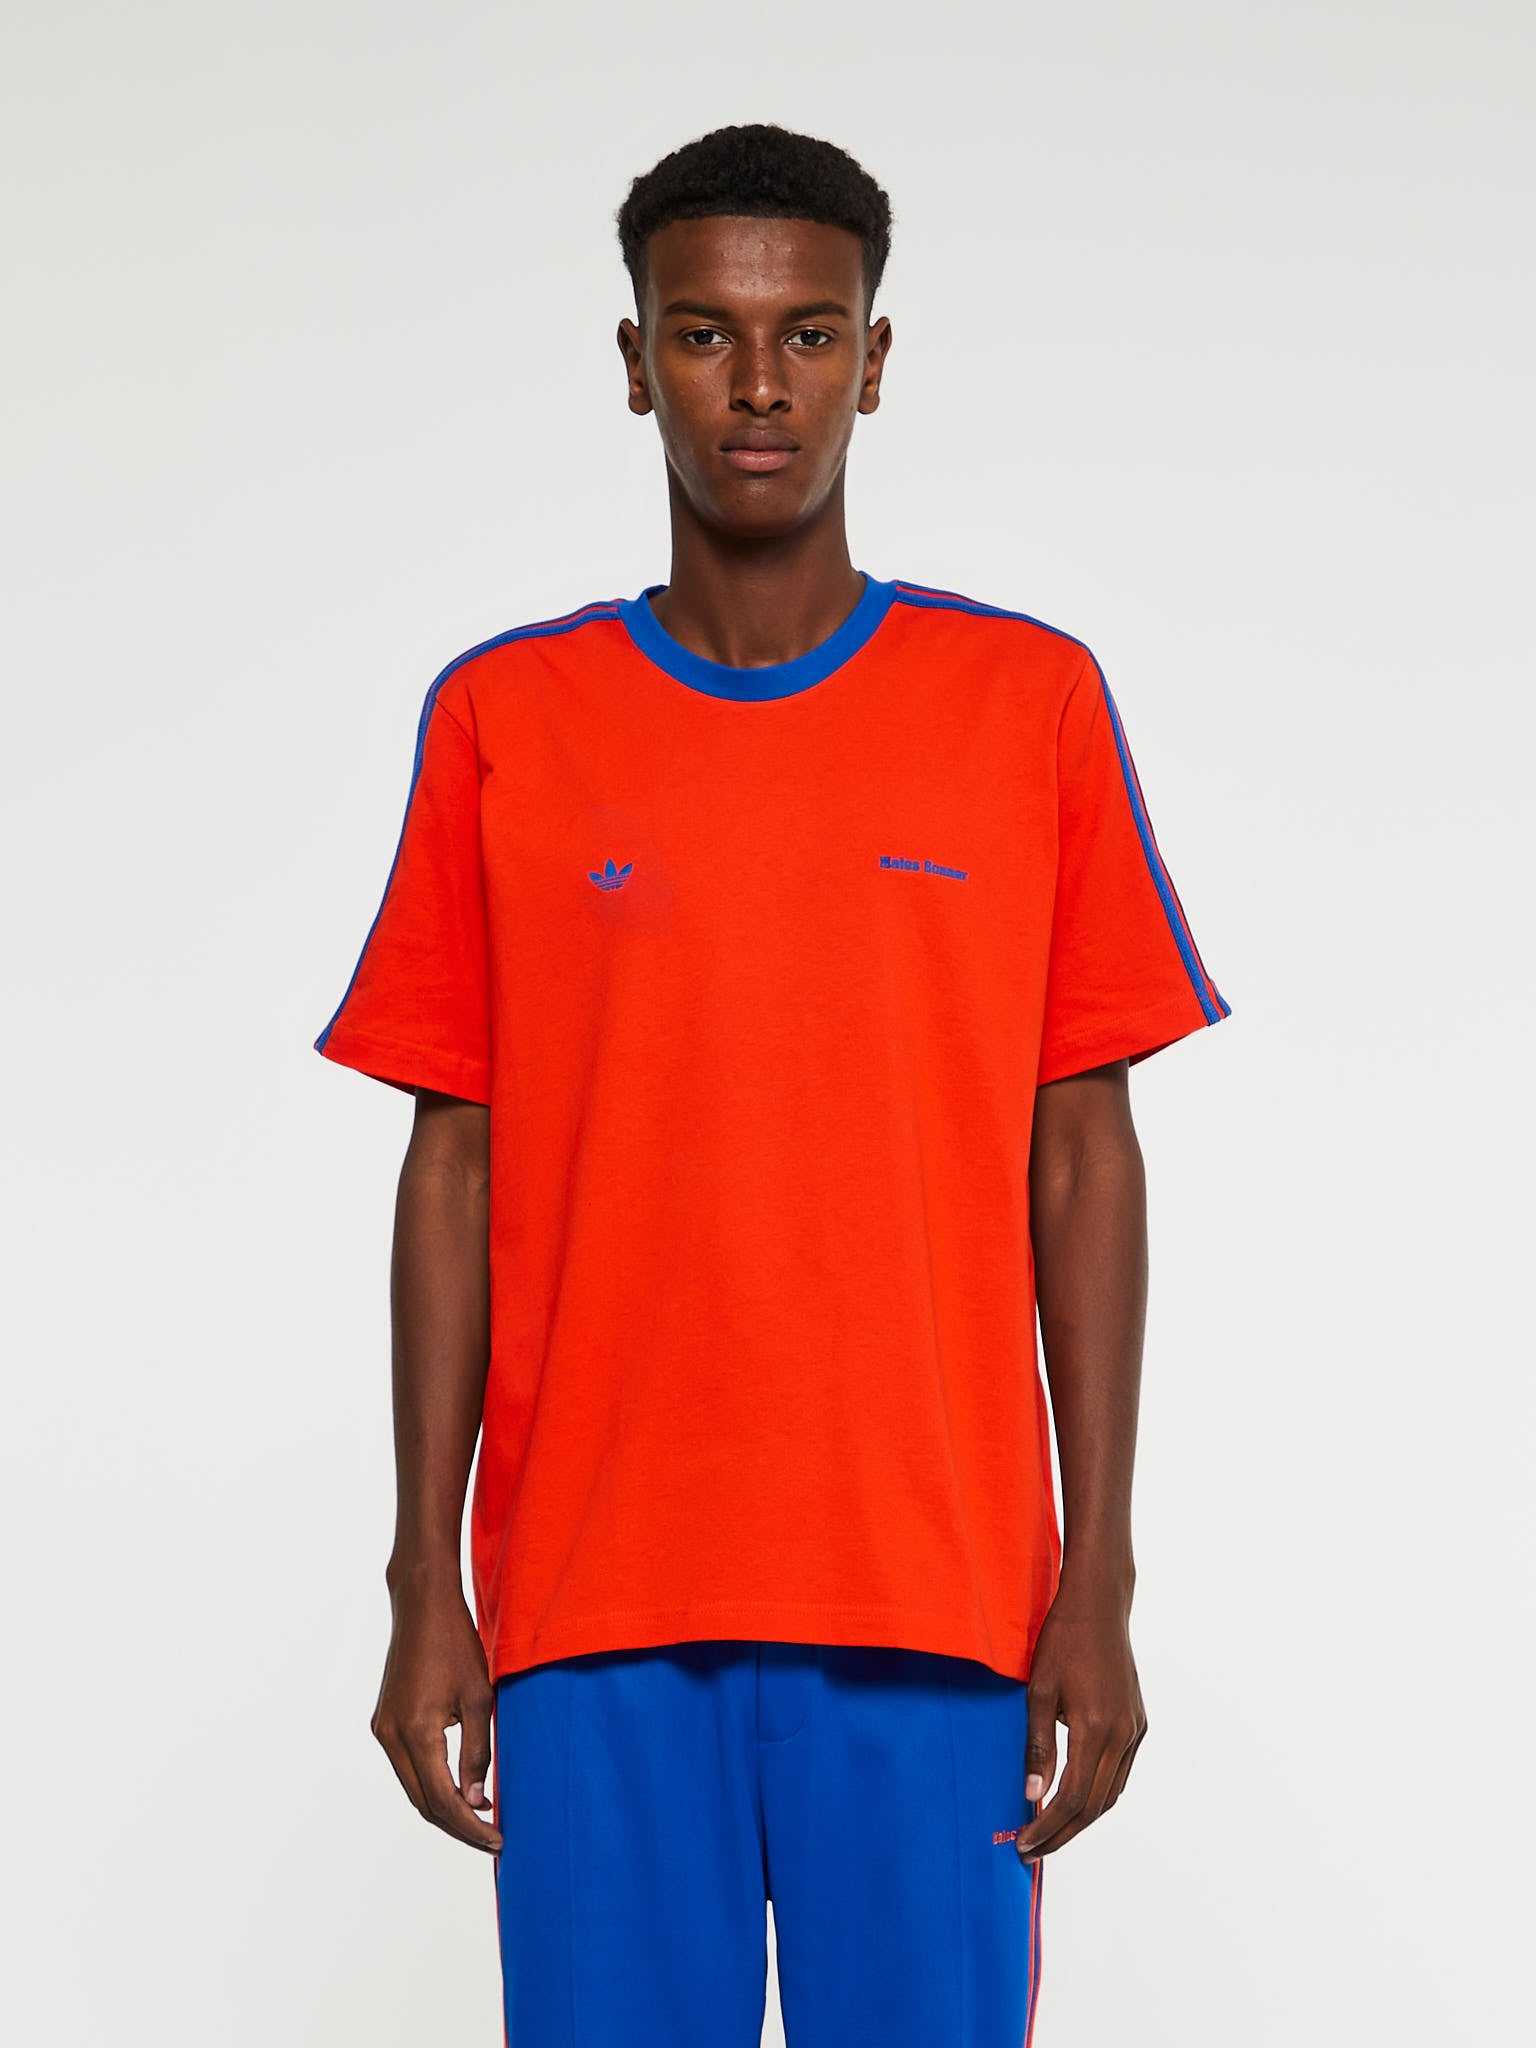 Wales Bonner T-Shirt in Orange and Blue